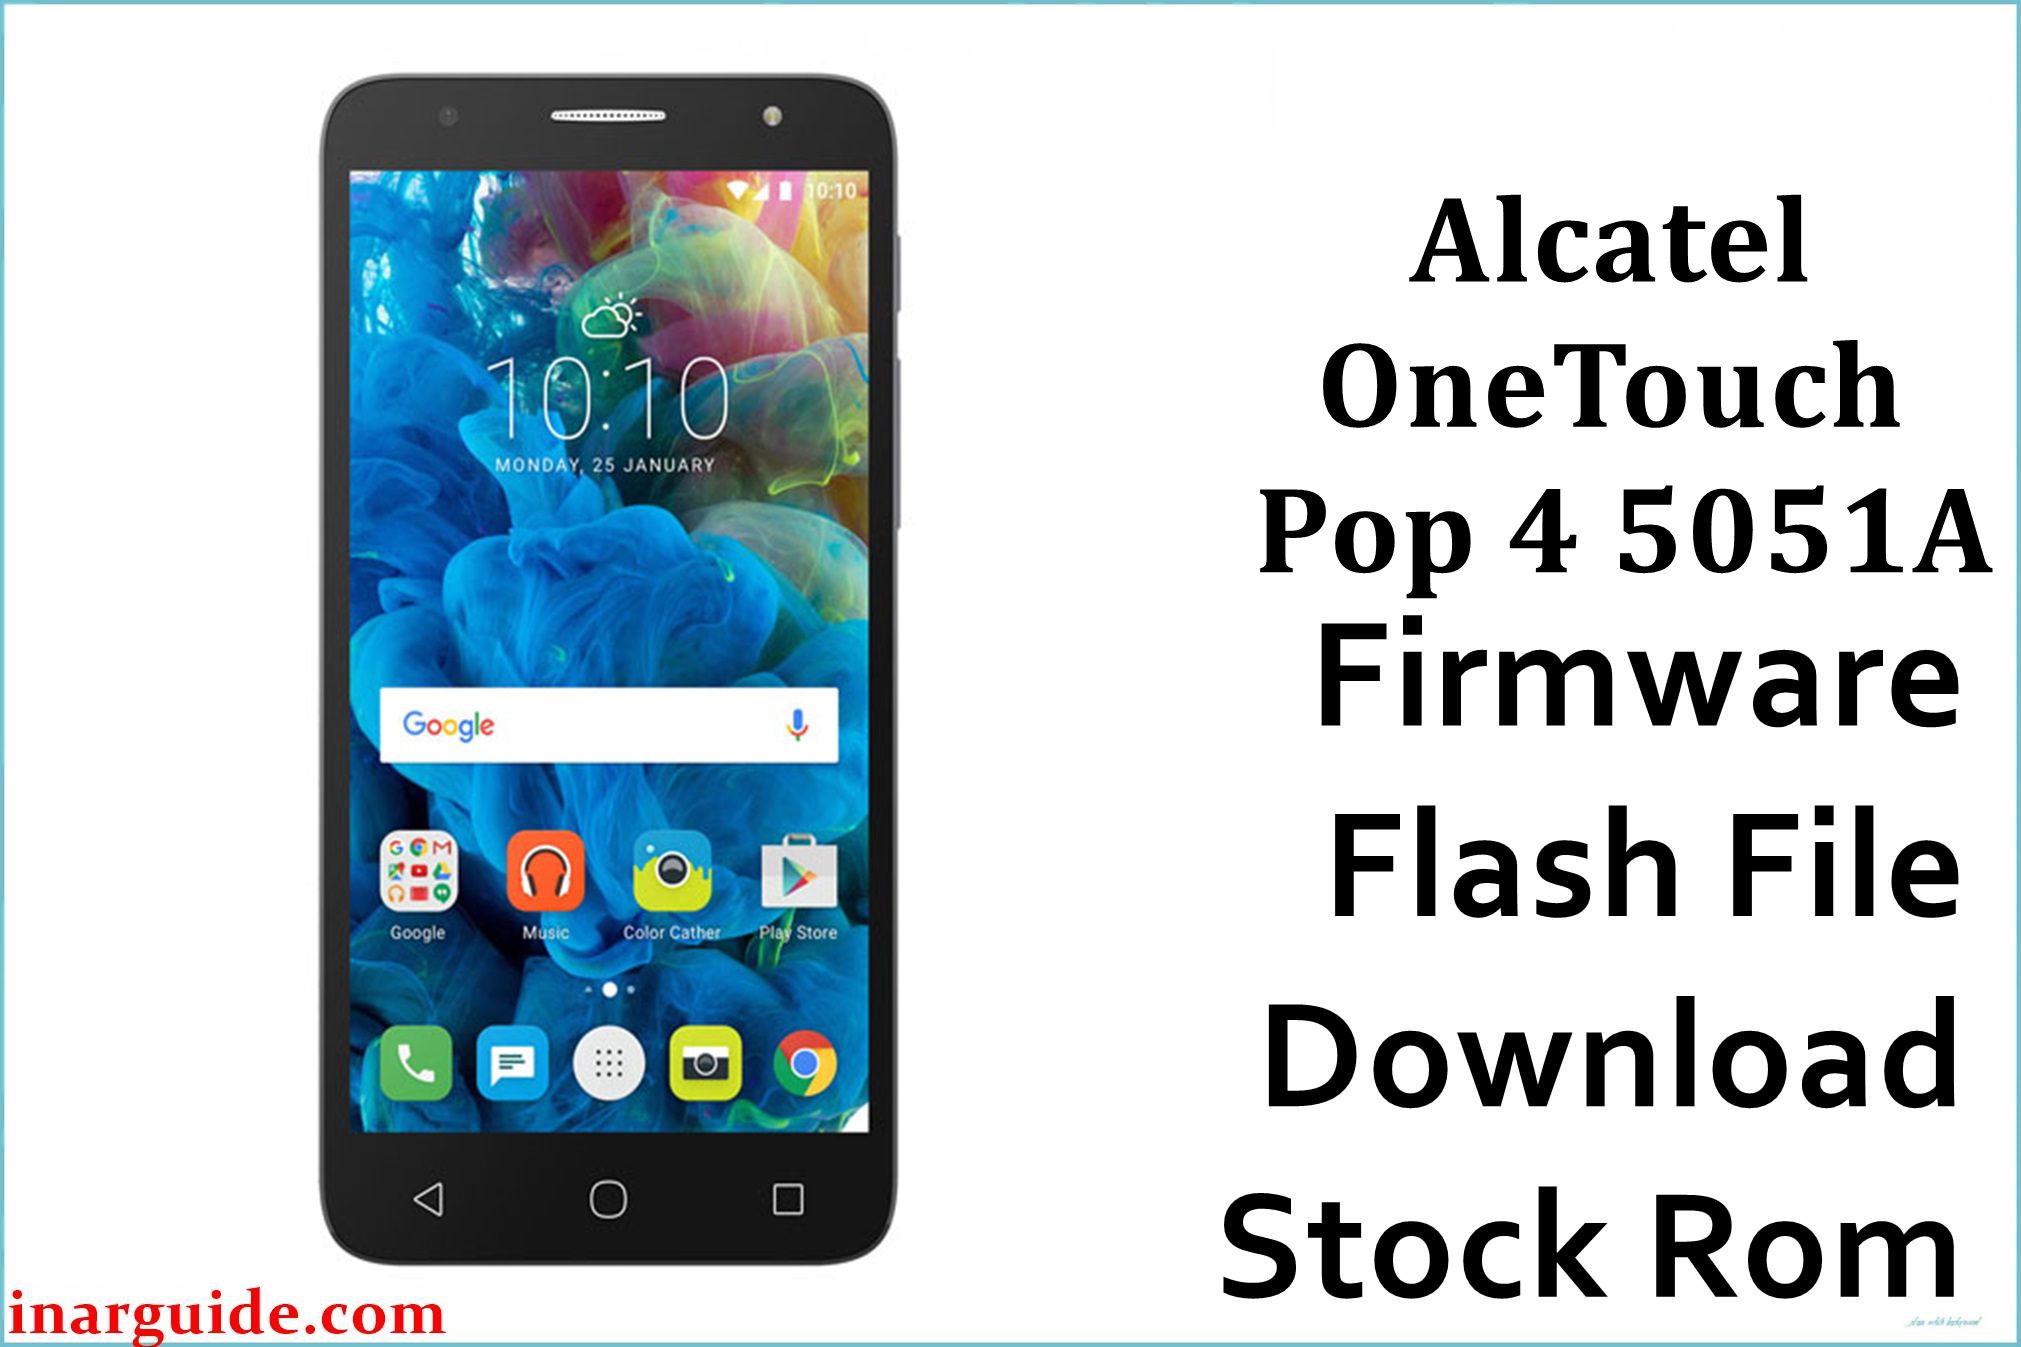 Alcatel OneTouch Pop 4 5051A